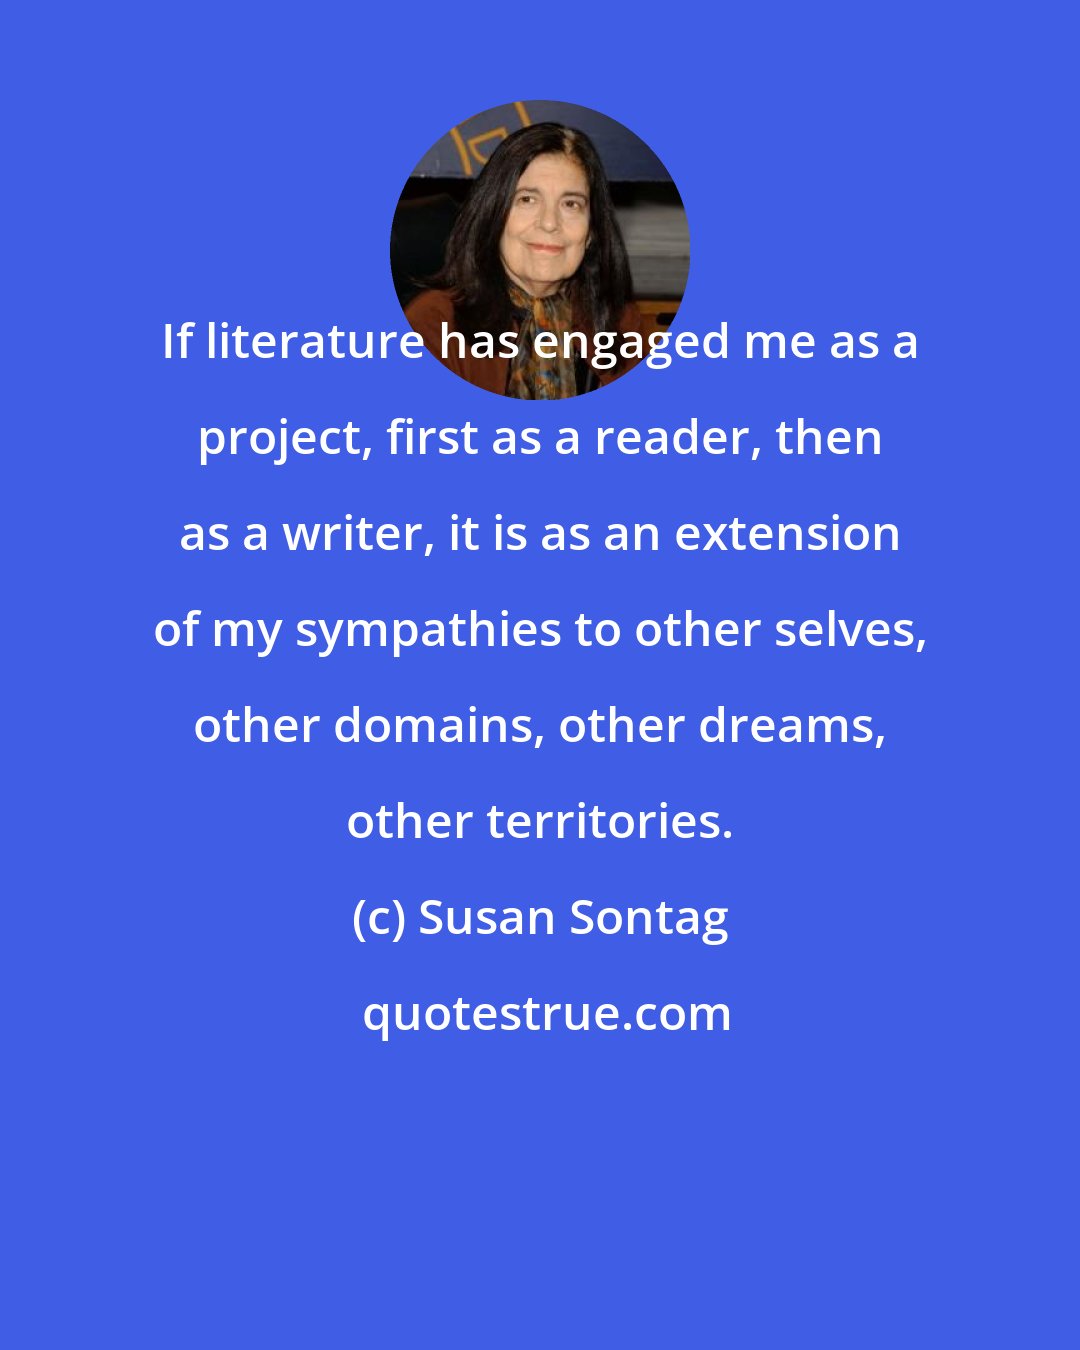 Susan Sontag: If literature has engaged me as a project, first as a reader, then as a writer, it is as an extension of my sympathies to other selves, other domains, other dreams, other territories.